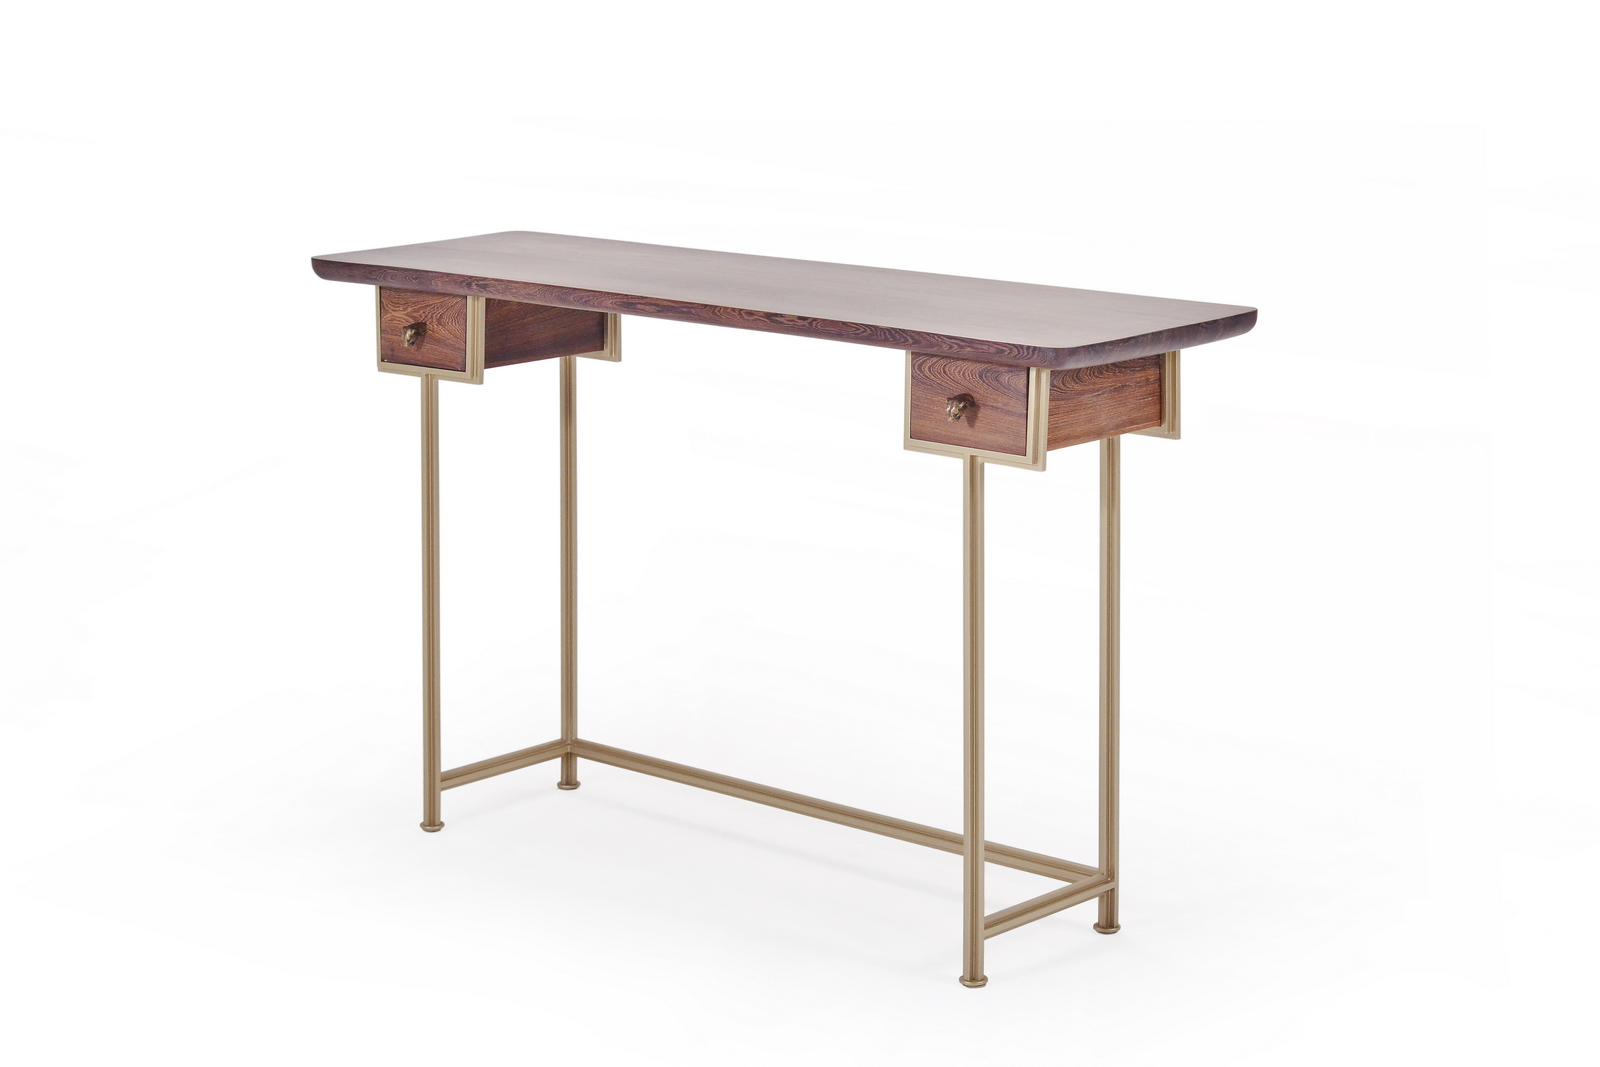 PTendercool-Customized Desk-BS1-BB-BL-NO-211007-02